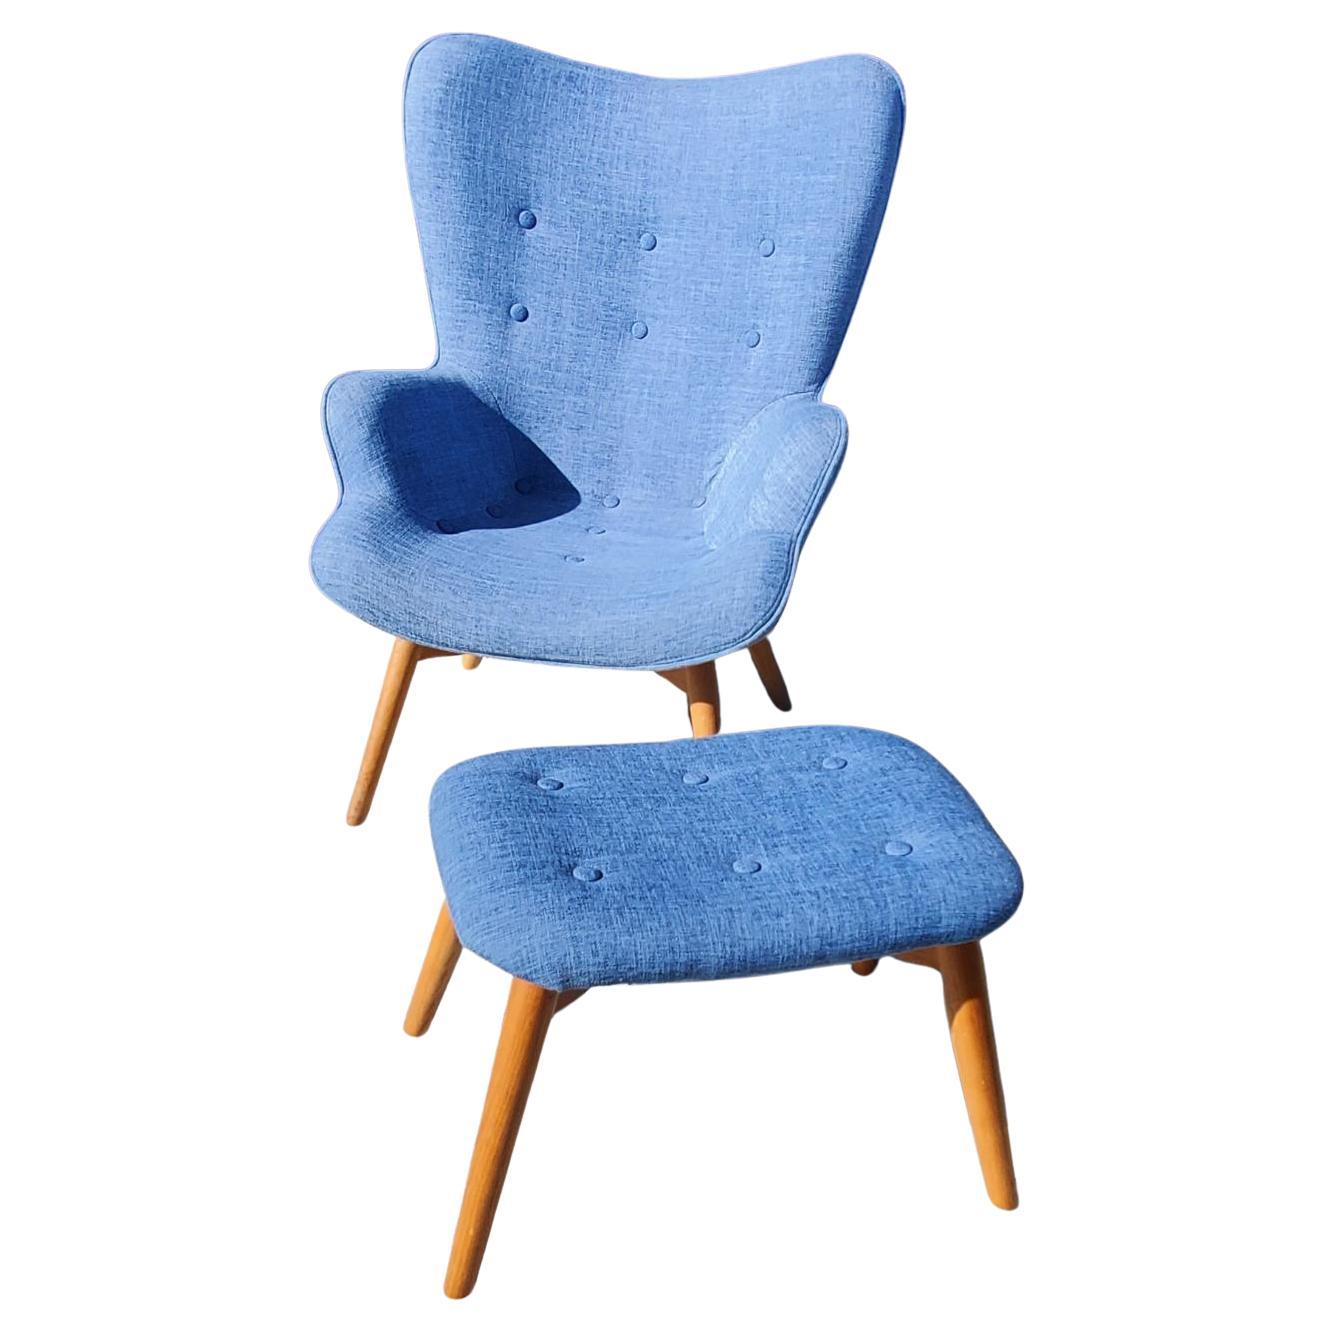 Modern Upholstered Lounge Chair With Matching Footstool / Ottoman. For Sale